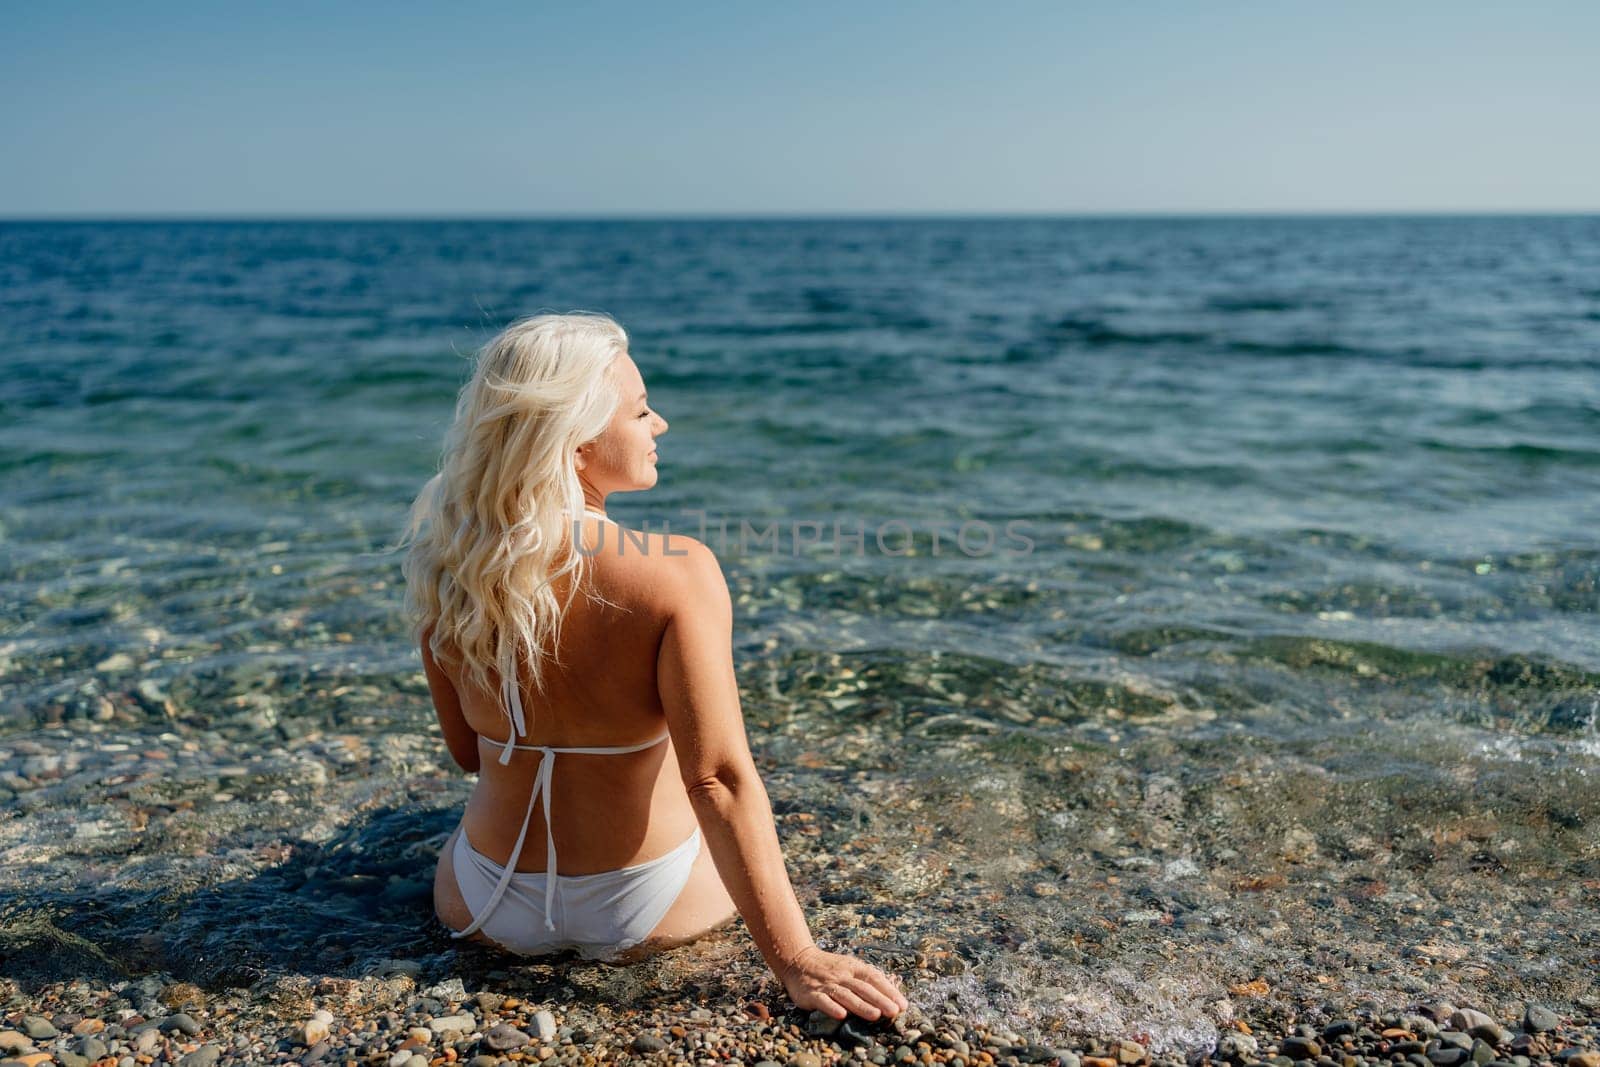 A woman in a bikini is sitting in the ocean. The water is calm and the sky is clear